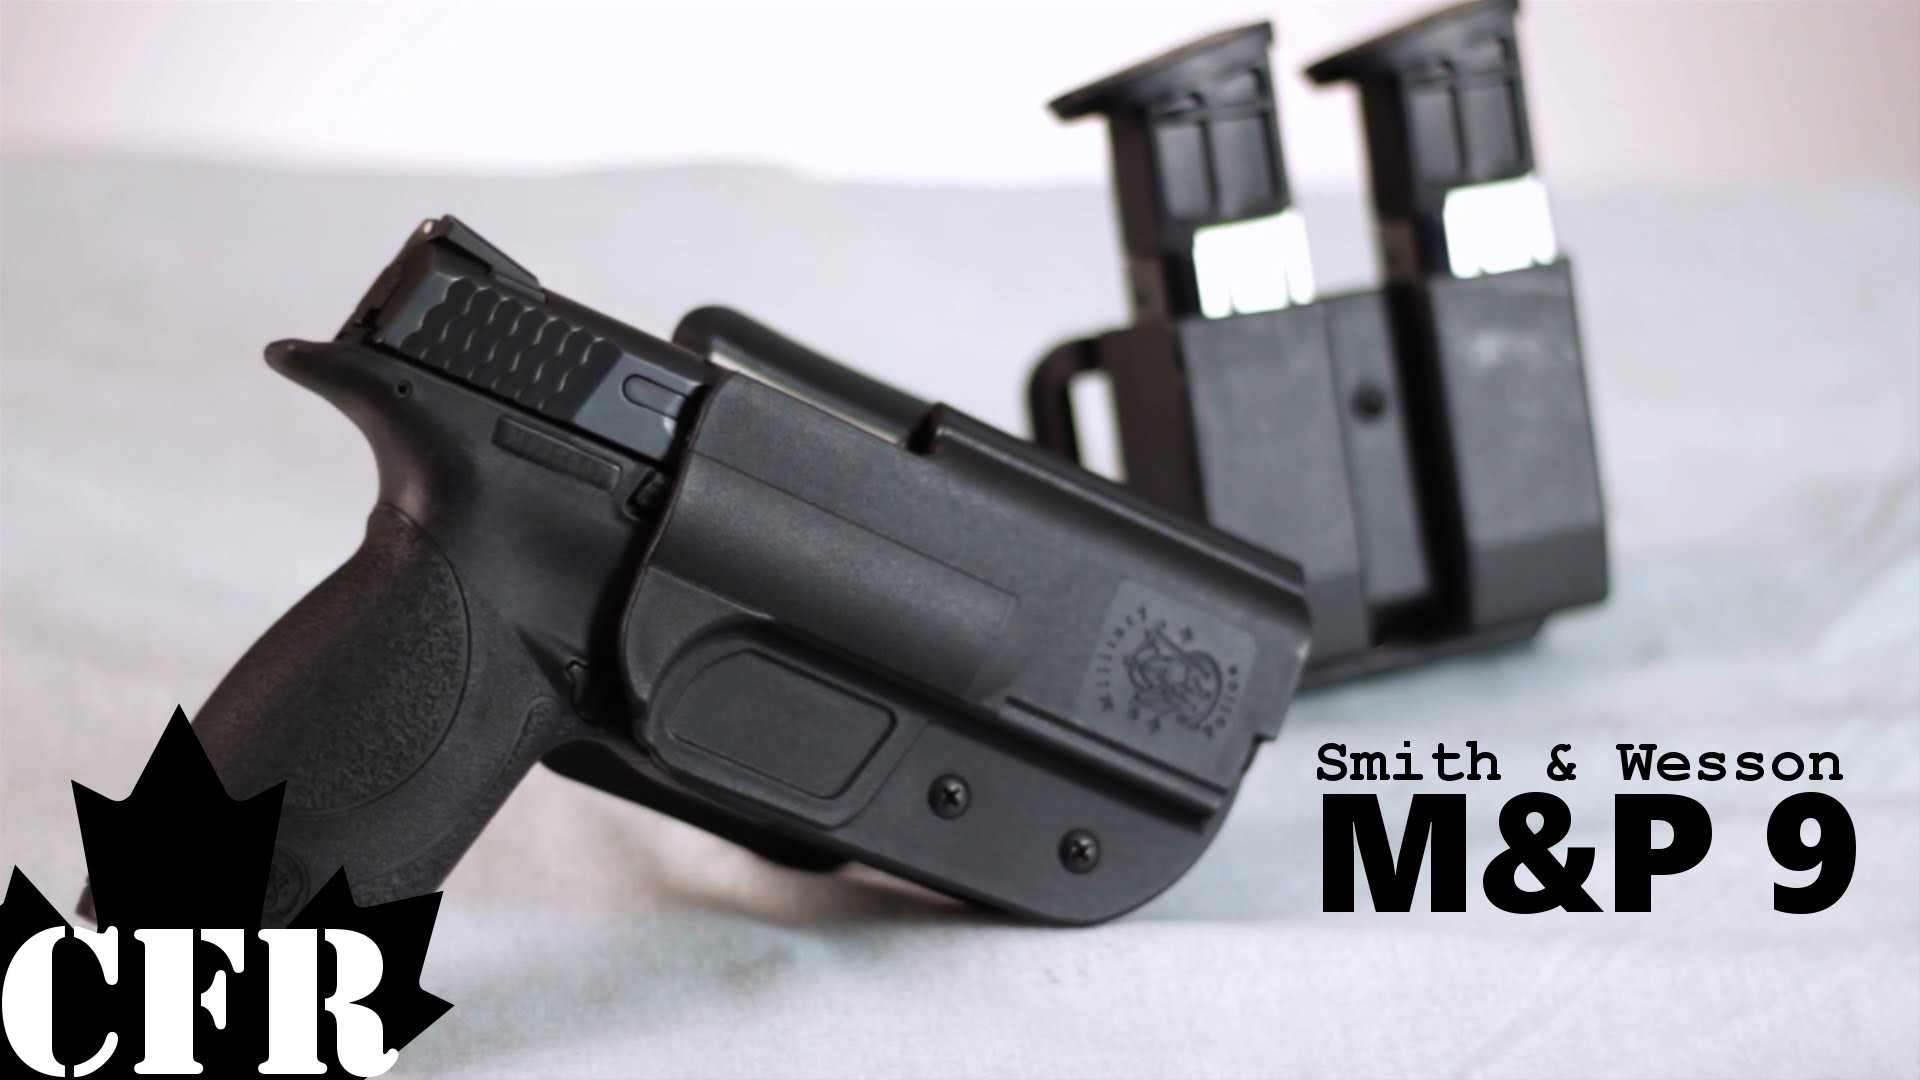 1920x1080 Smith & Wesson M&P 9mm Review